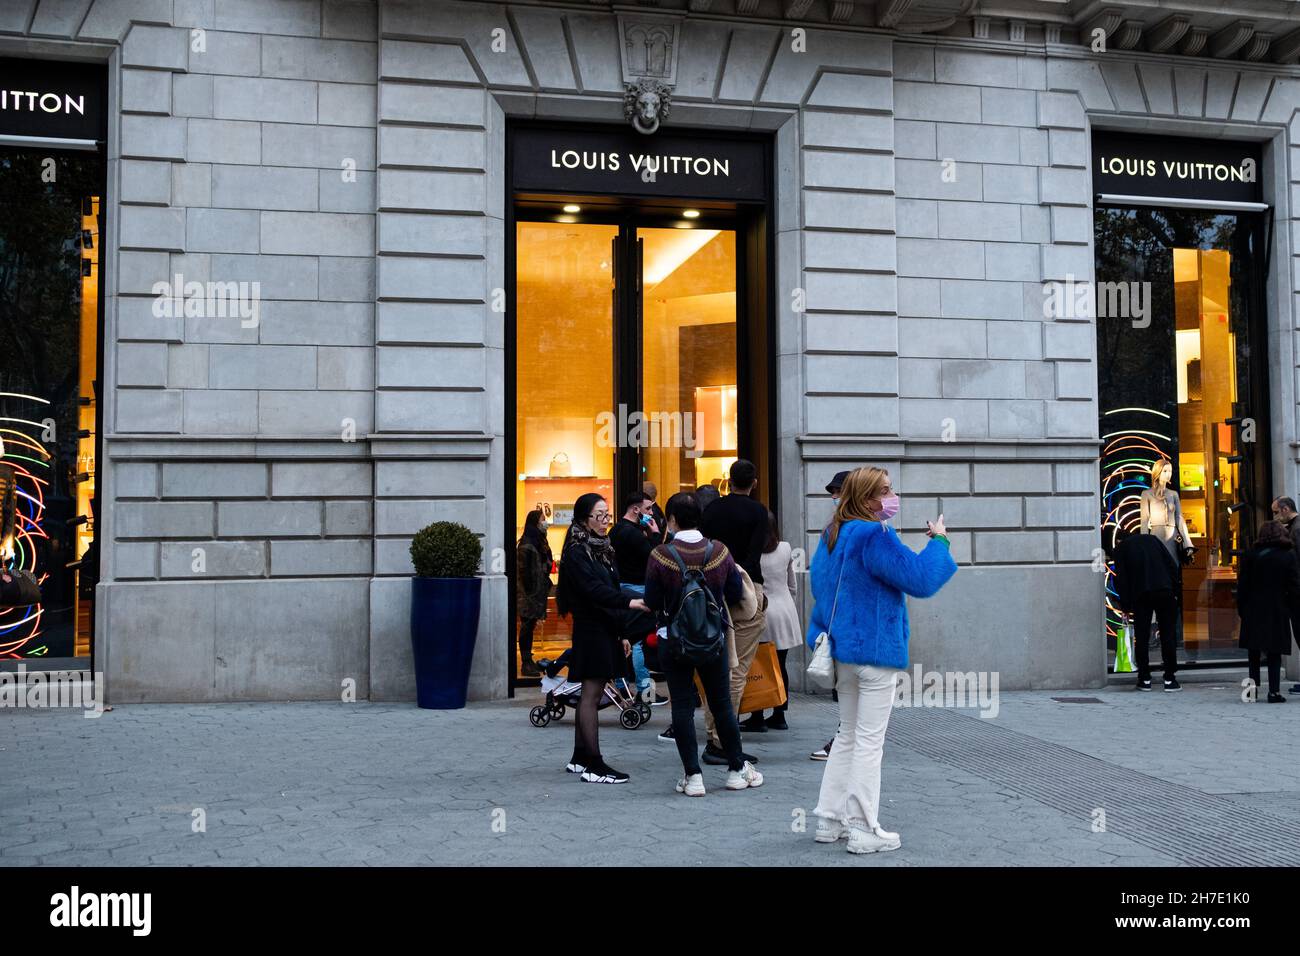 Spain. 20th Nov, 2021. People stand in front of a Louis Vuitton